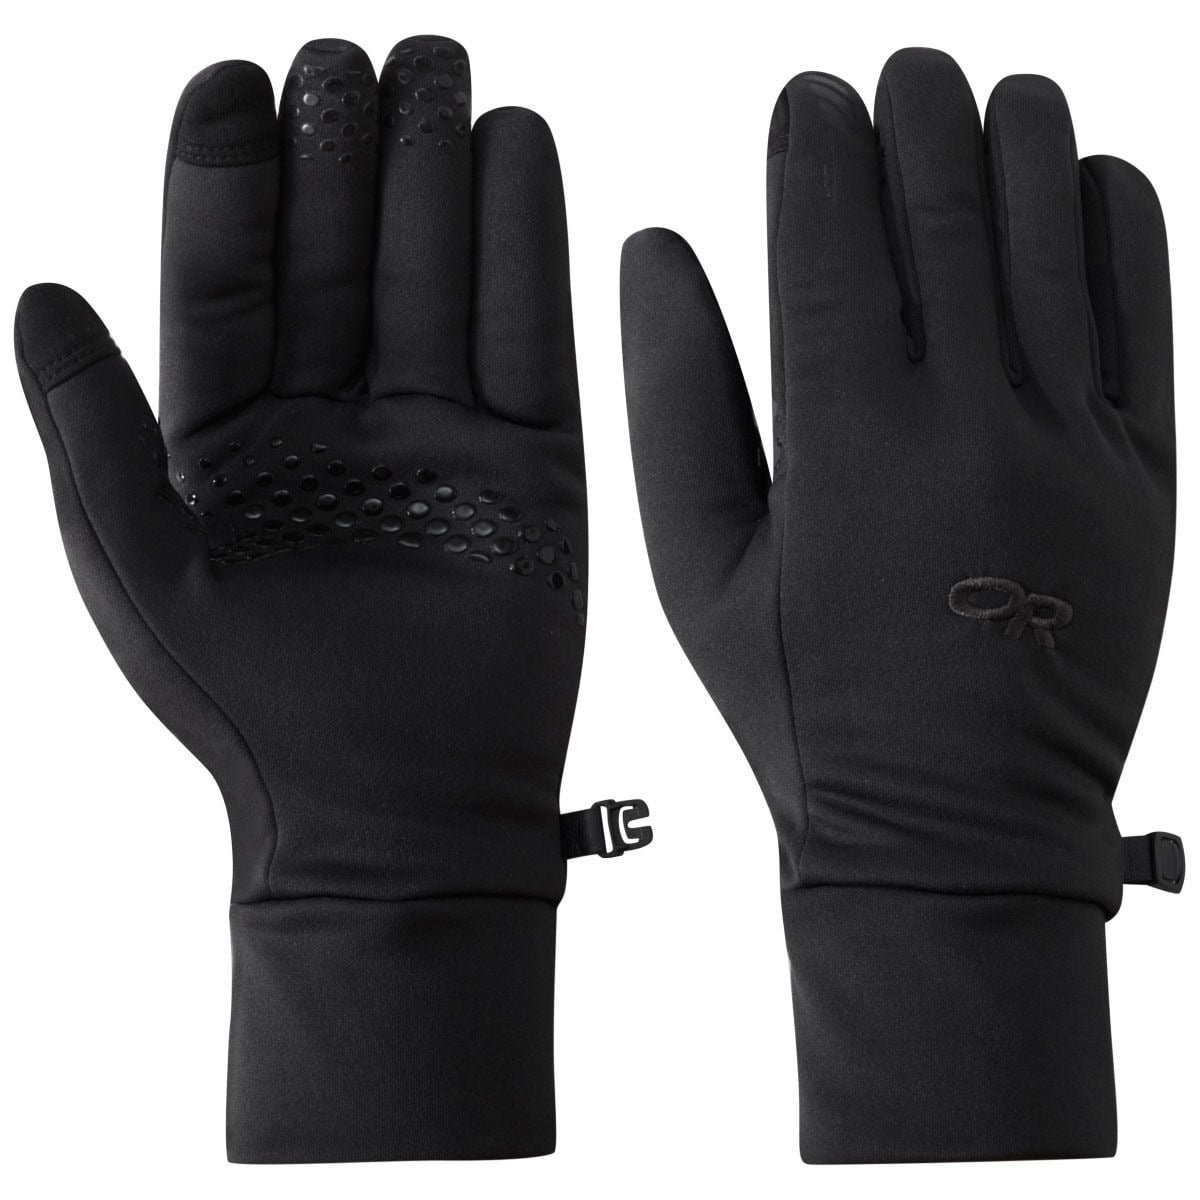 Men's Ansted midweight, Lined Hunting Gloves - Disruption®